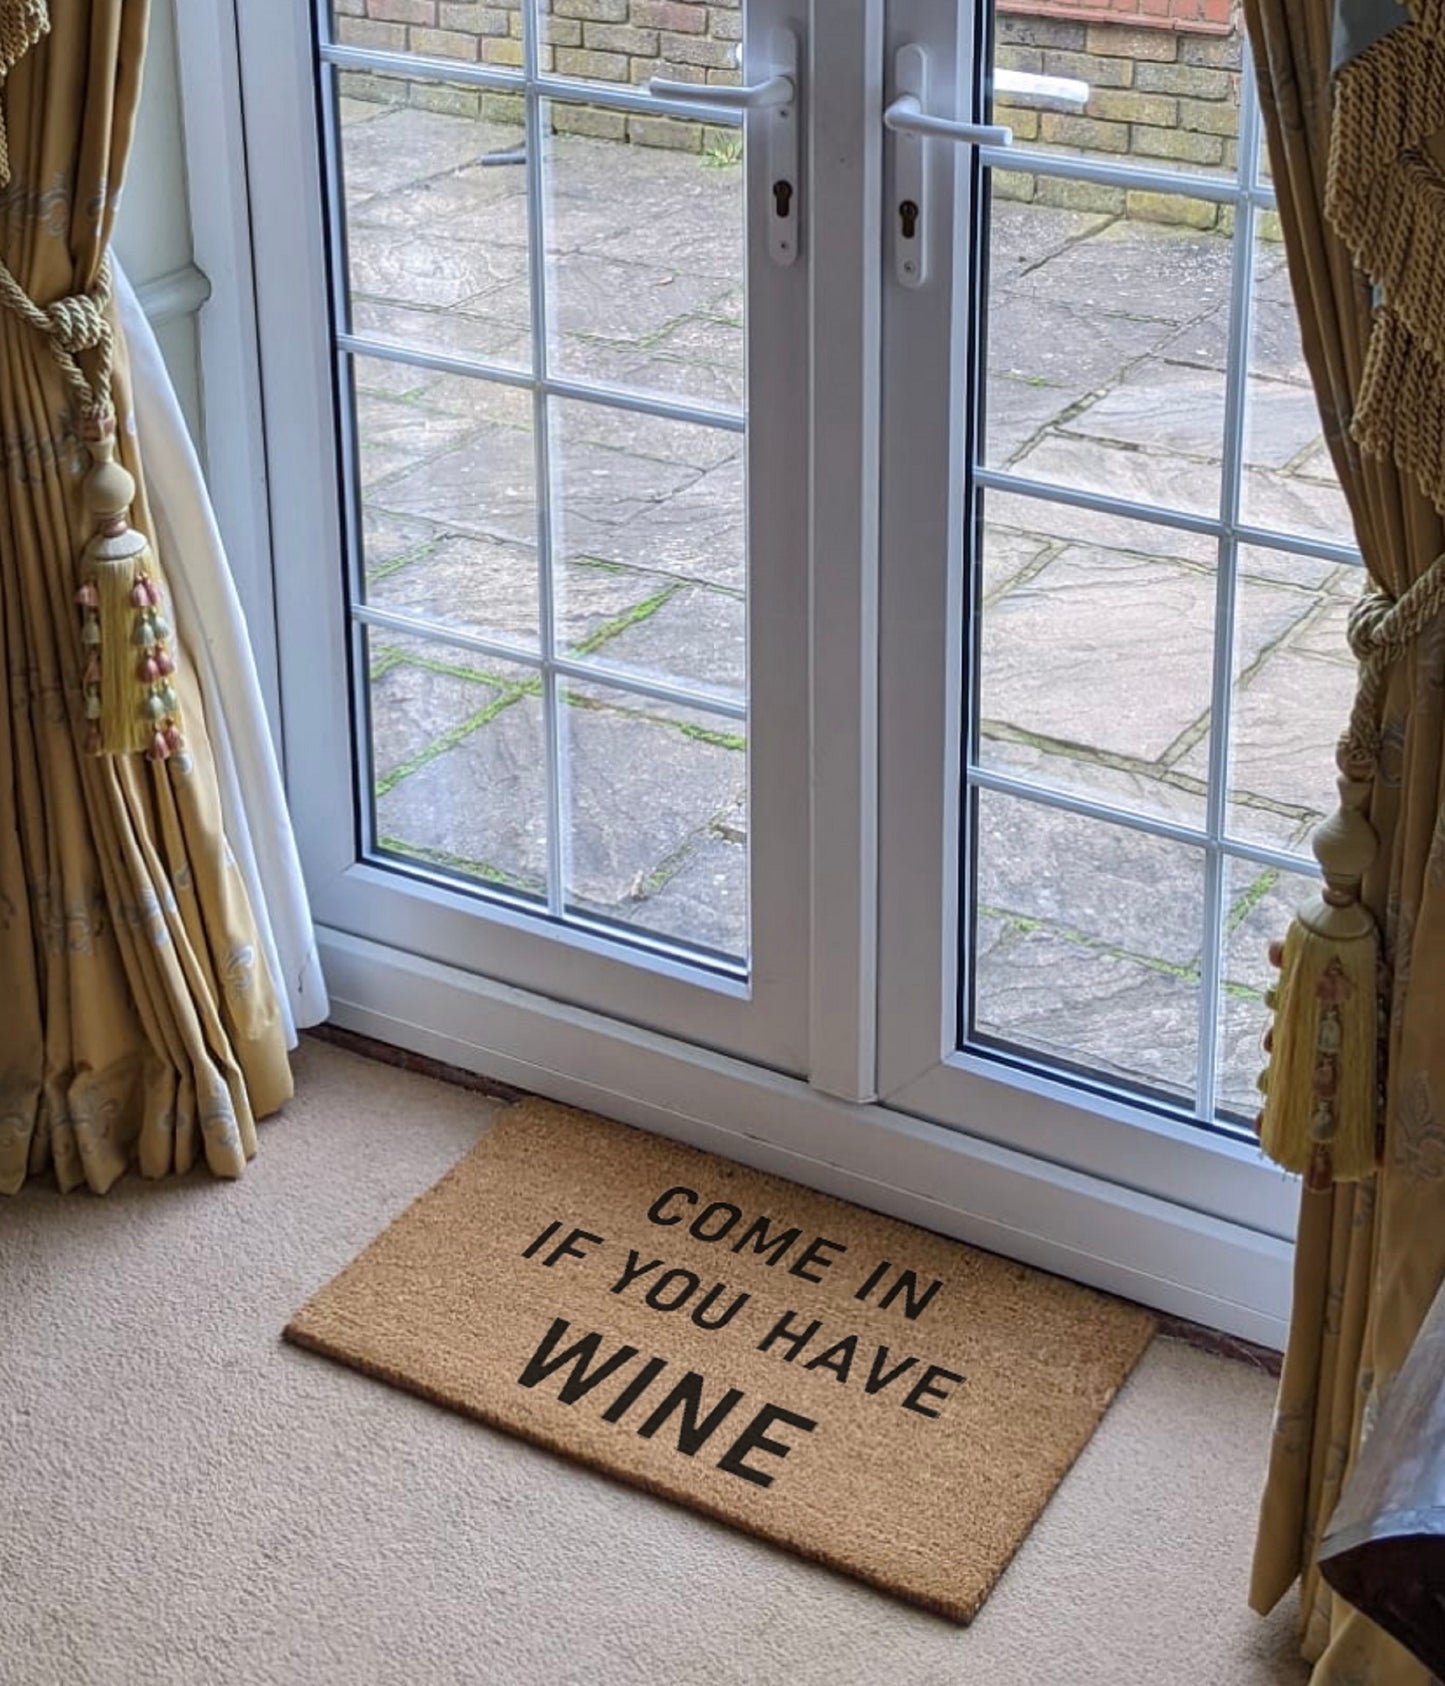 Come In If You Have Wine